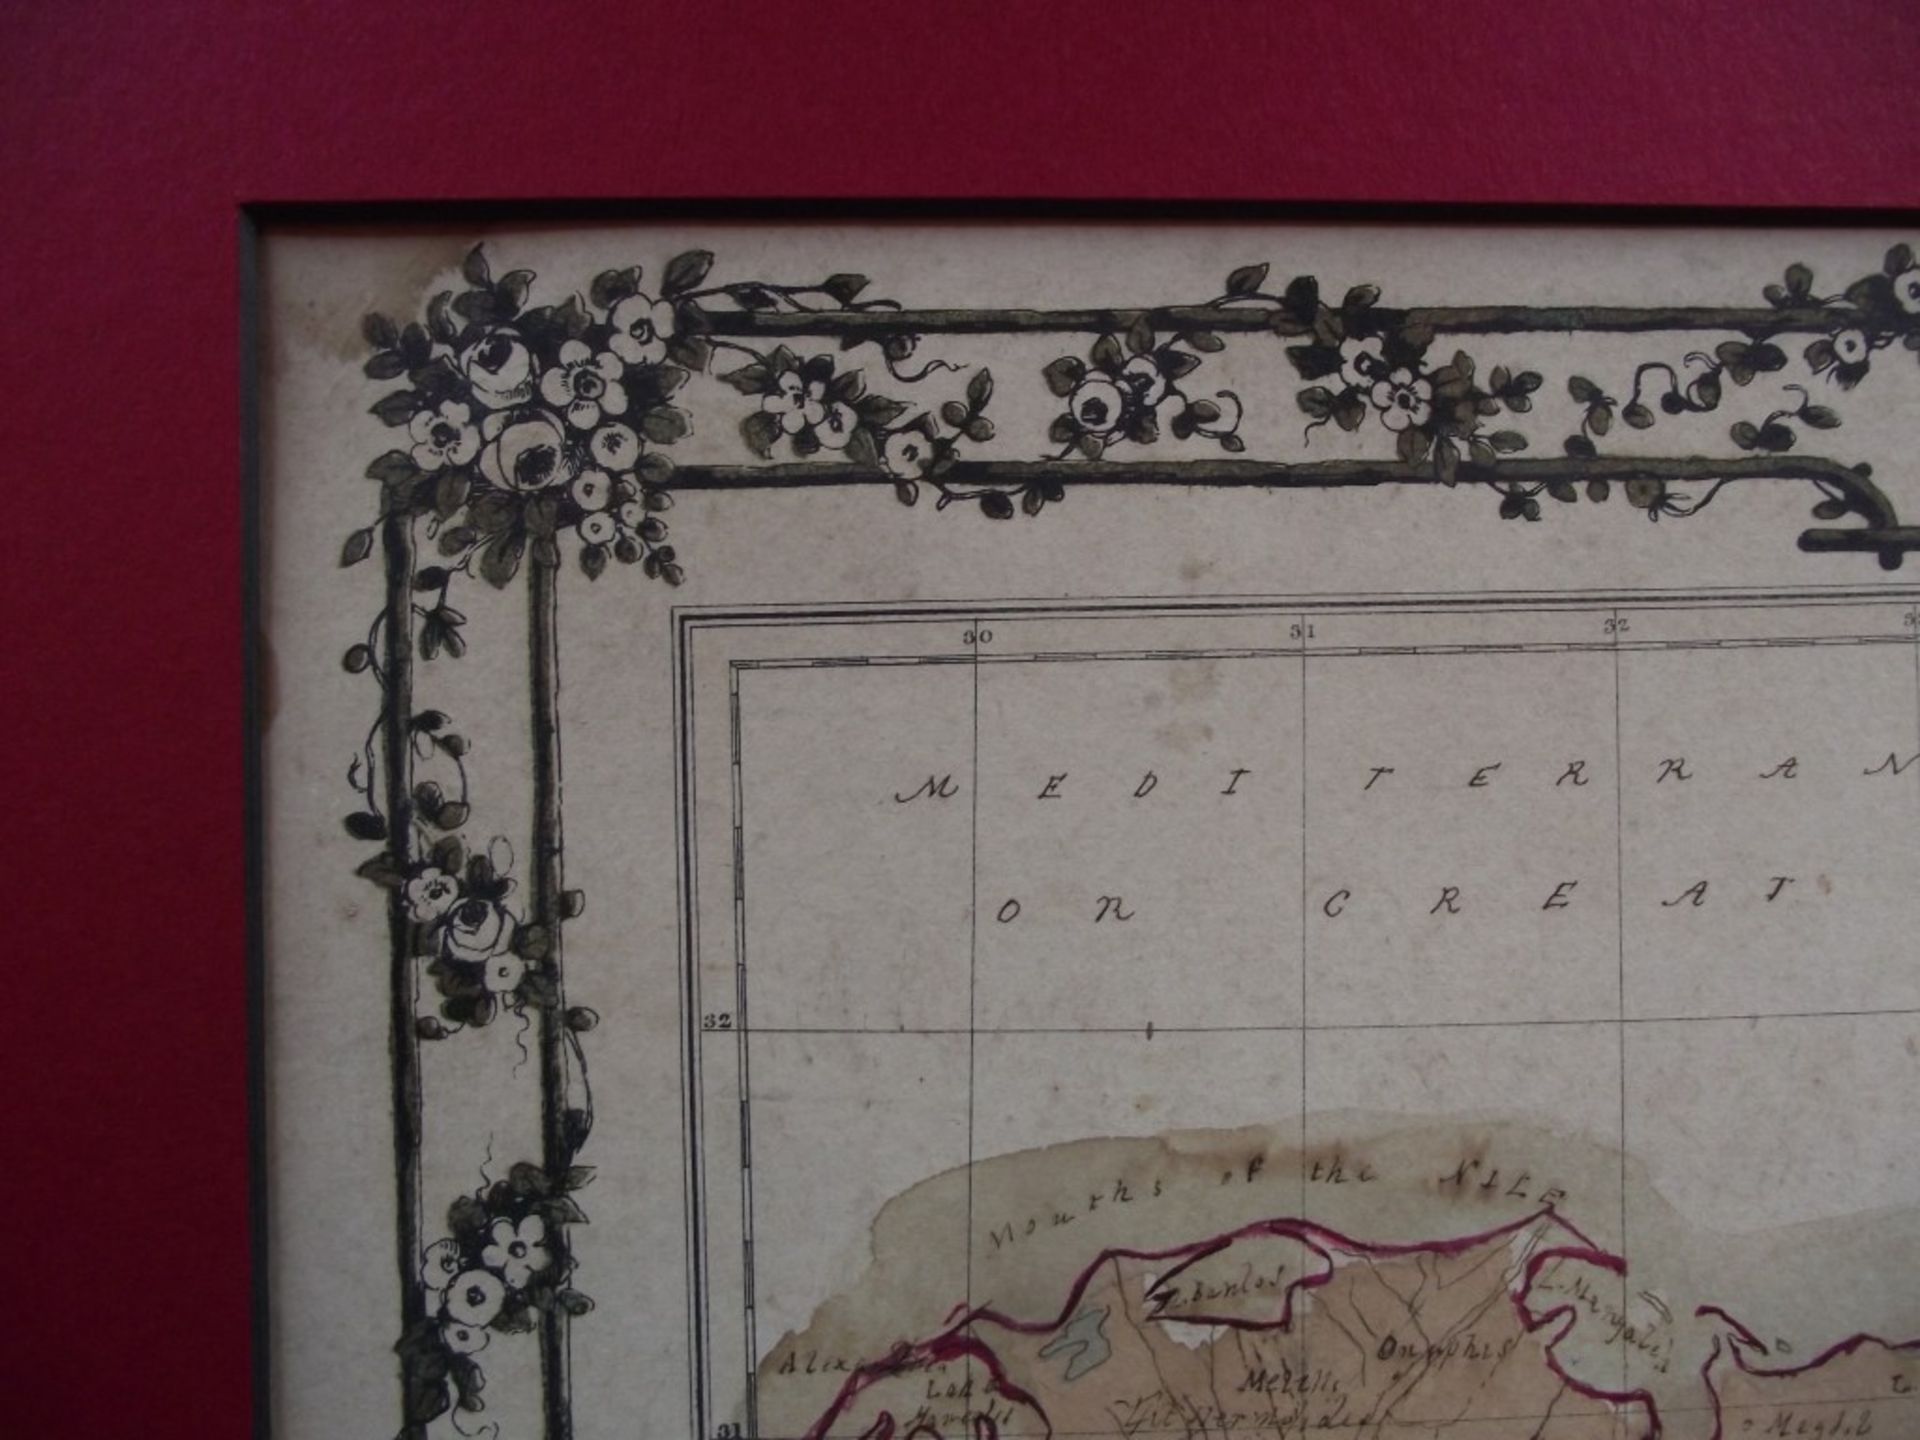 2 x 19th Century Hand Drawn Maps - Signed & Dated By Jane Edwards 1860 - Image 22 of 34